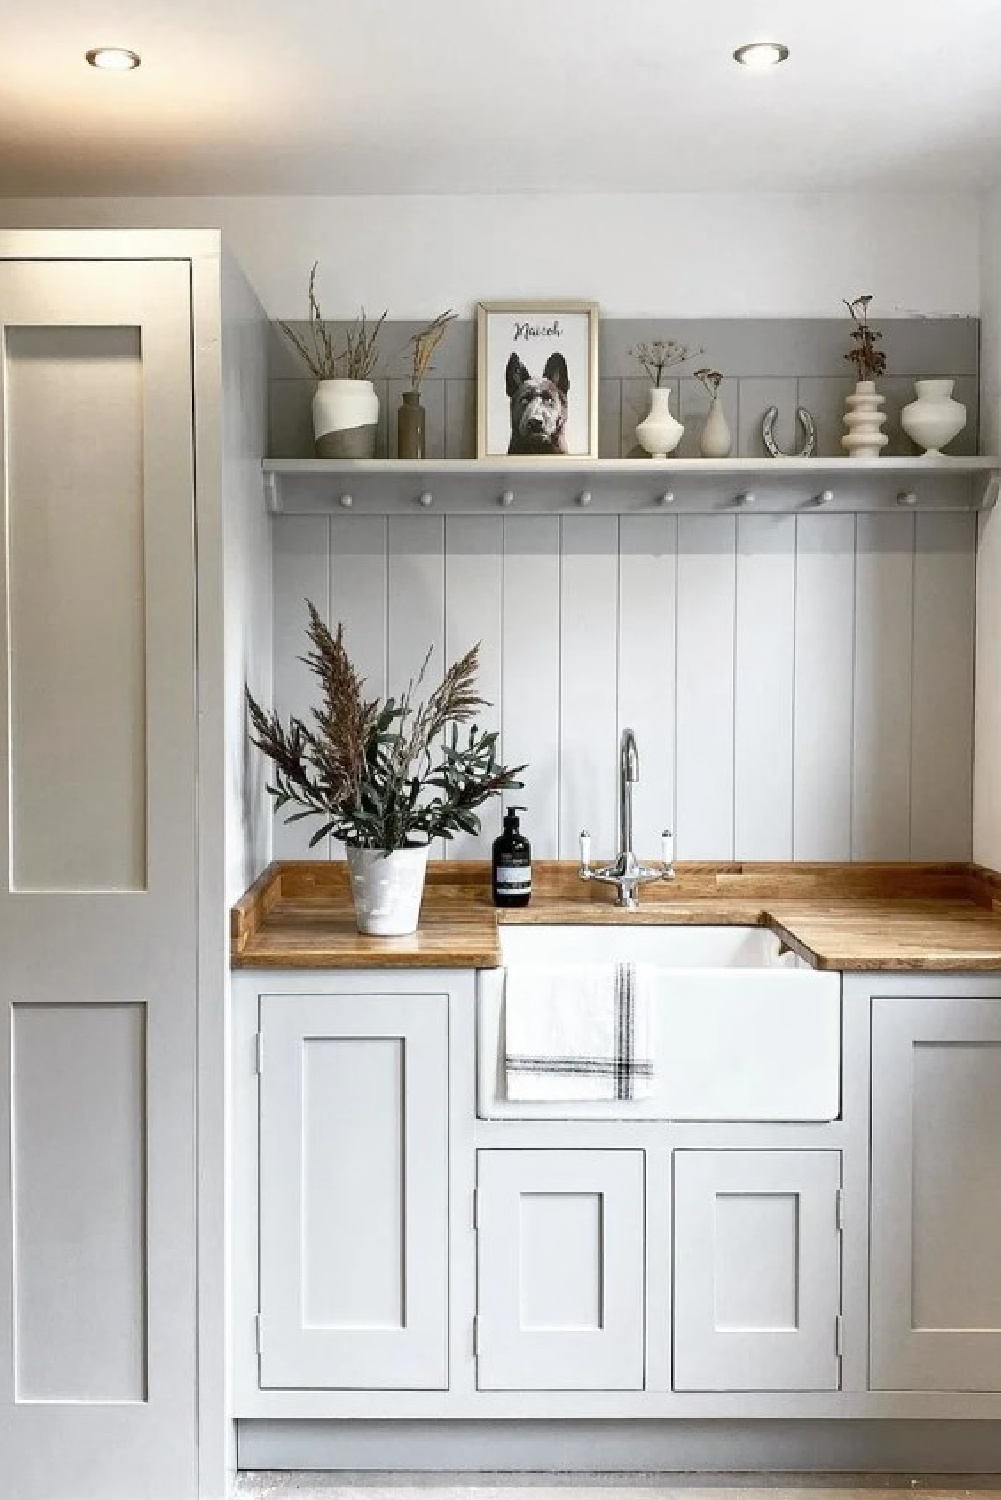 Pavilion Gray by Farrow & Ball on kitchen cabinets - @home_with_maicoh. #paviliongray